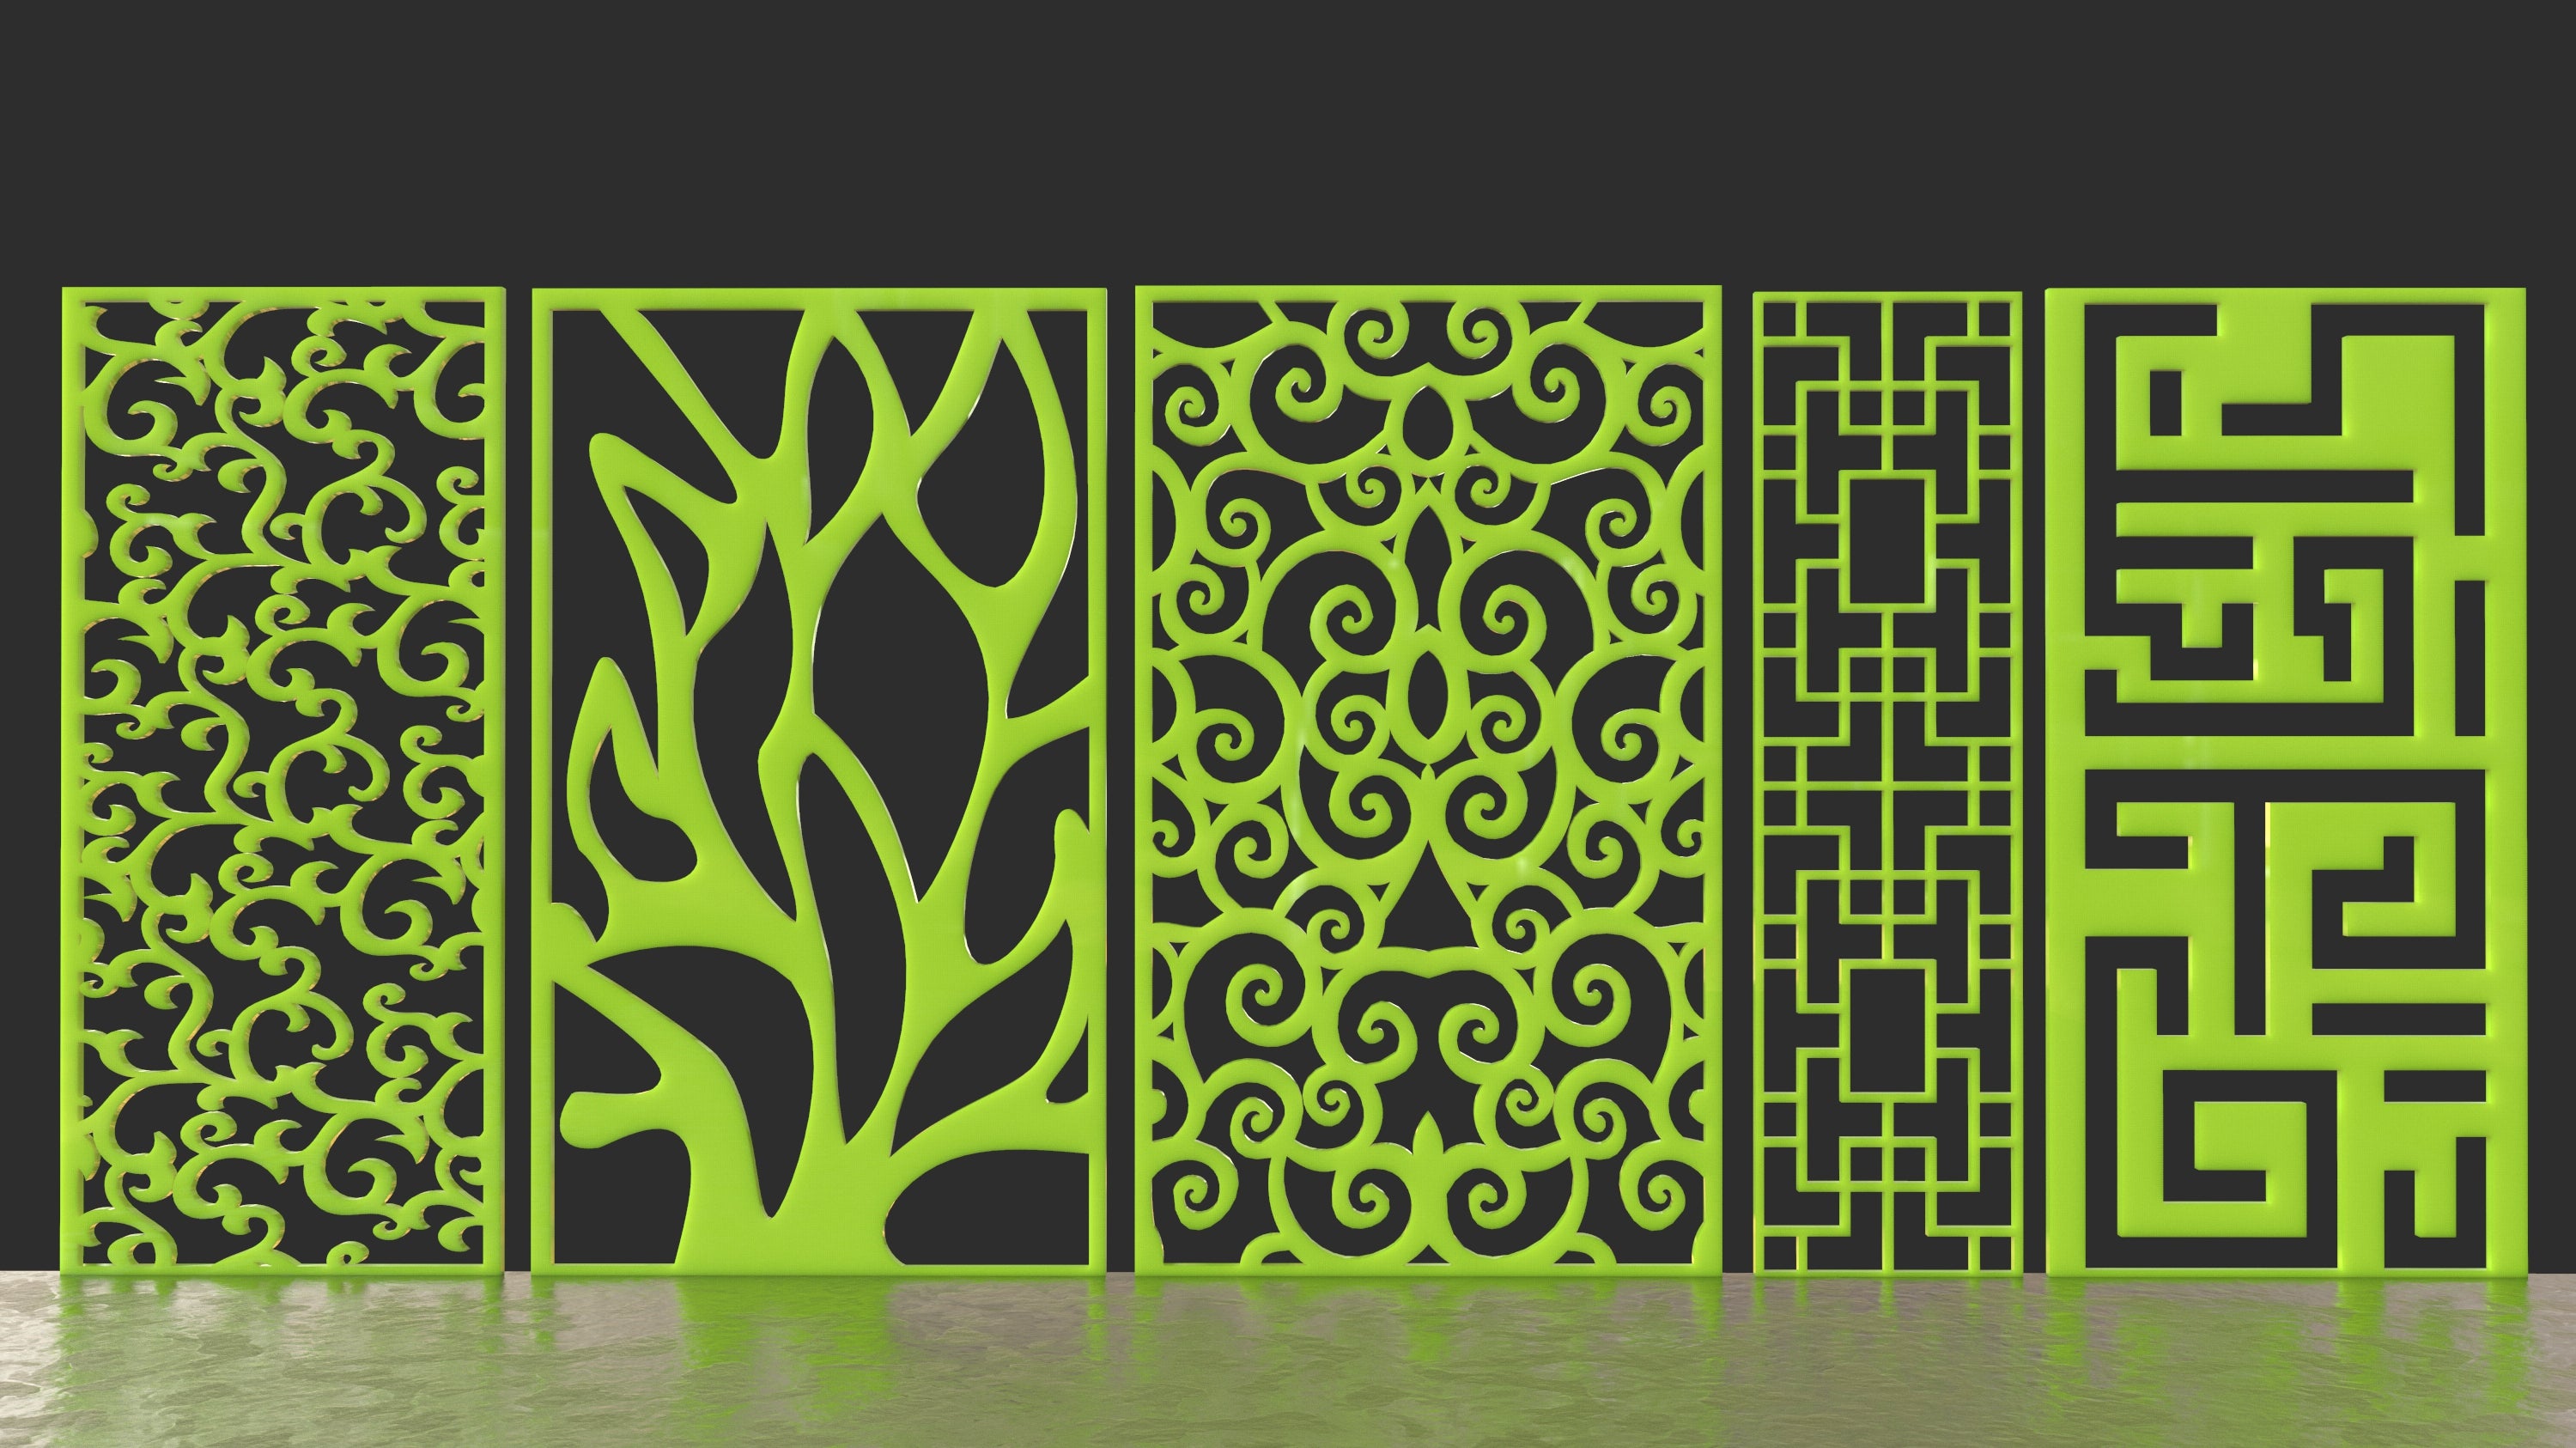 Tree Ornaments for decorative partitions panel screen CNC Laser Cutting File | SVG, DXF, AI |#C009|